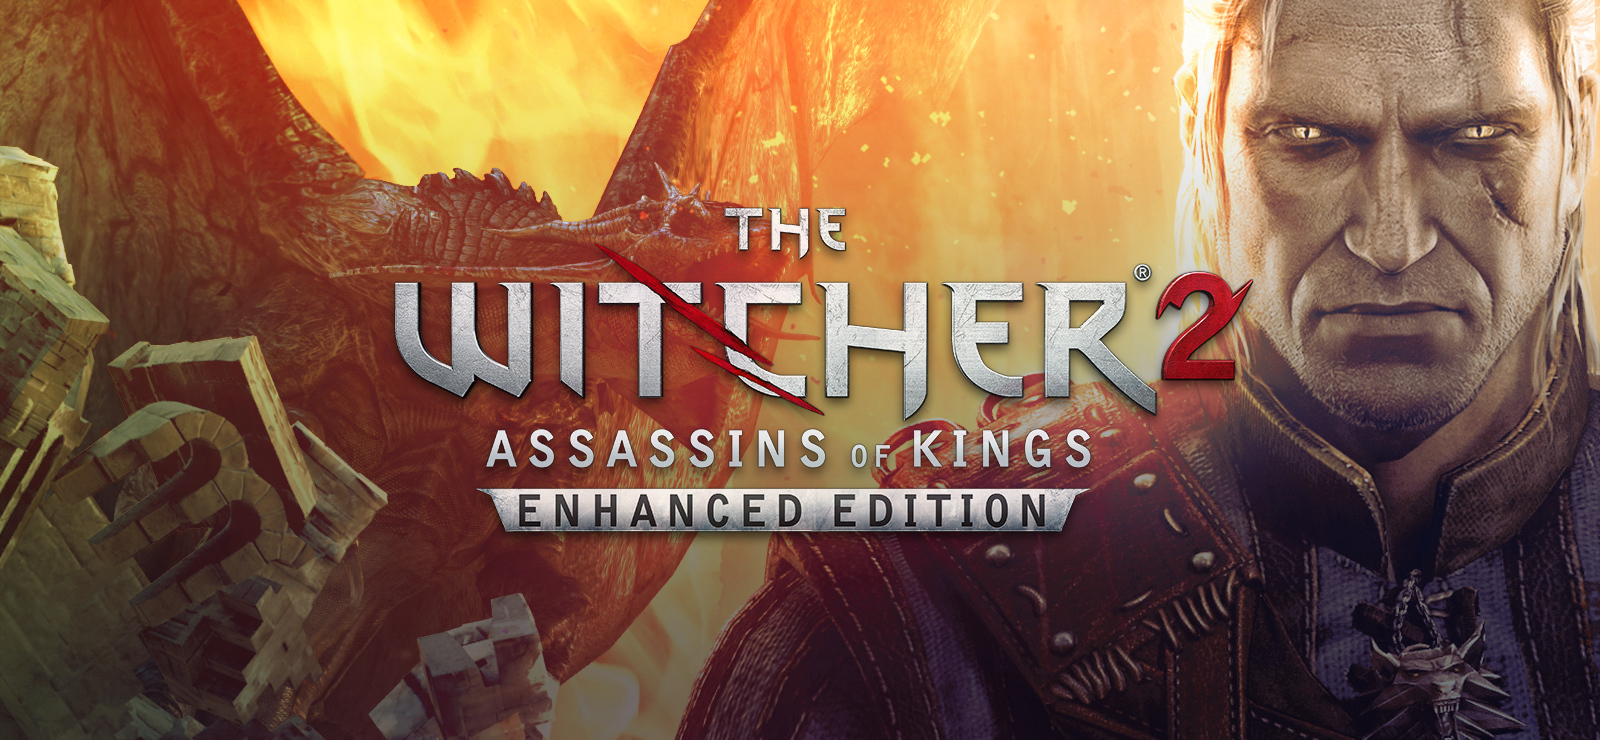 Witcher 2 assassins of kings steam фото 1